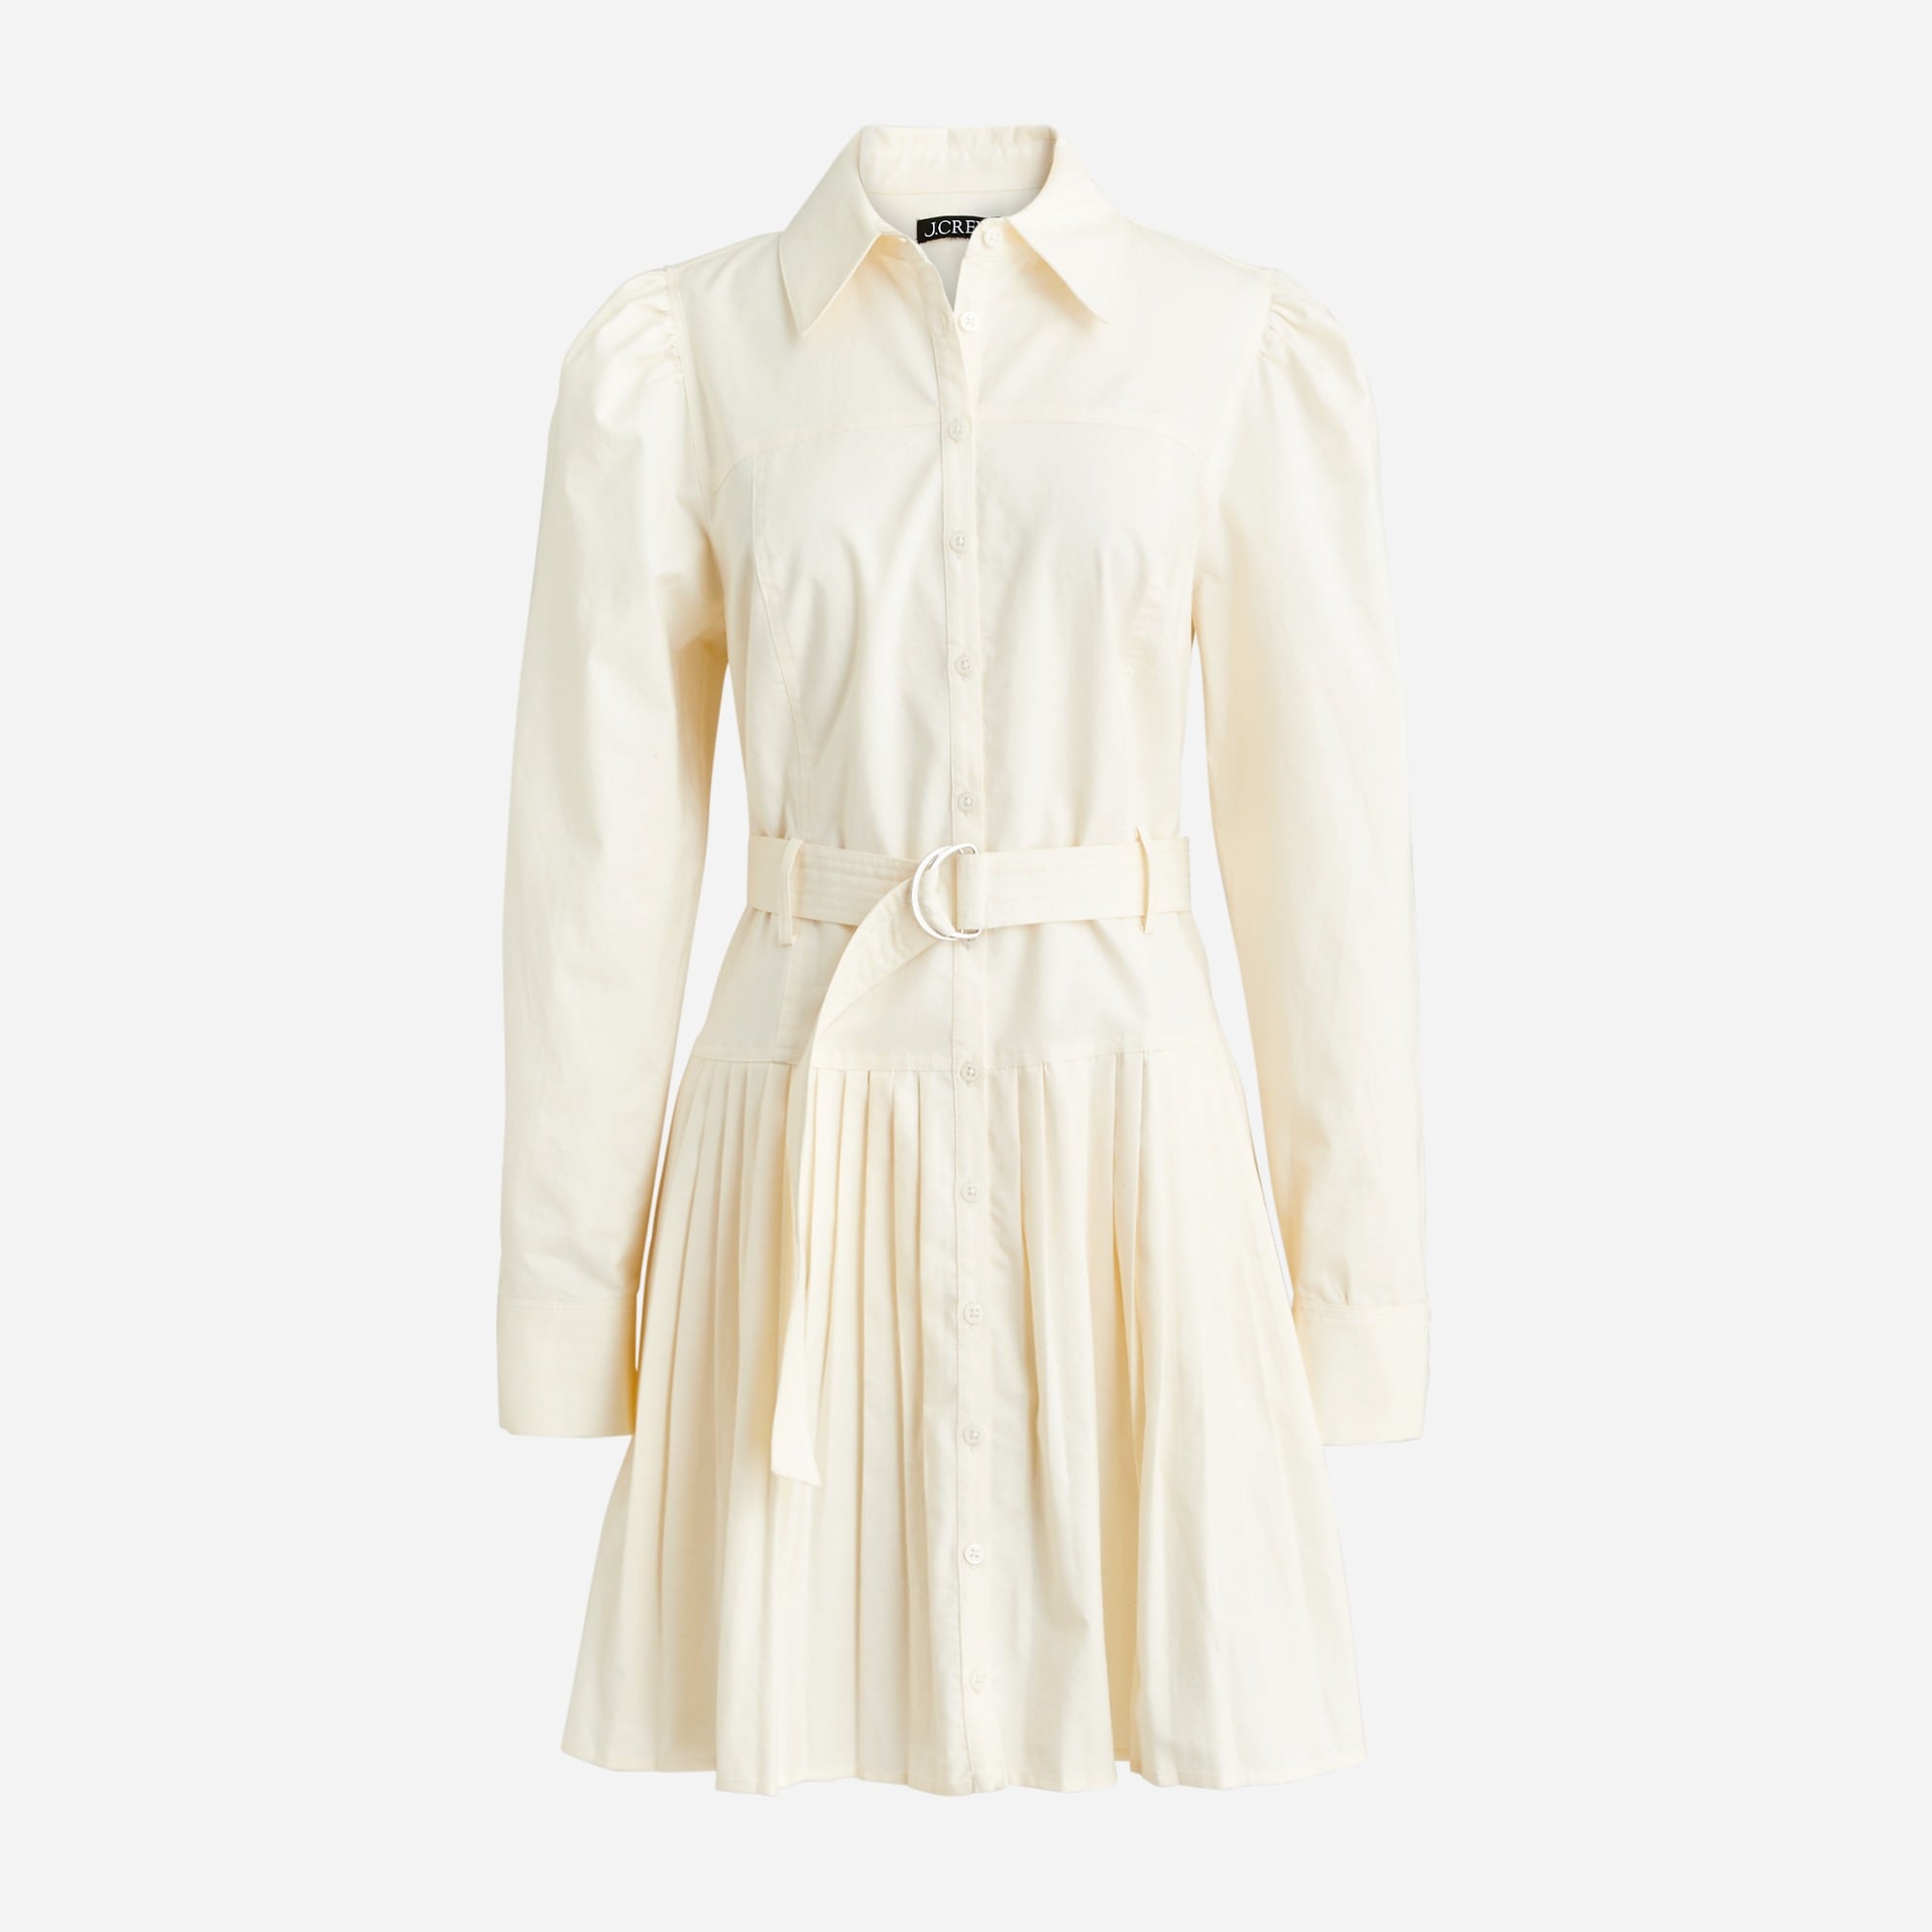  Fit-and-flare shirtdress in lightweight oxford